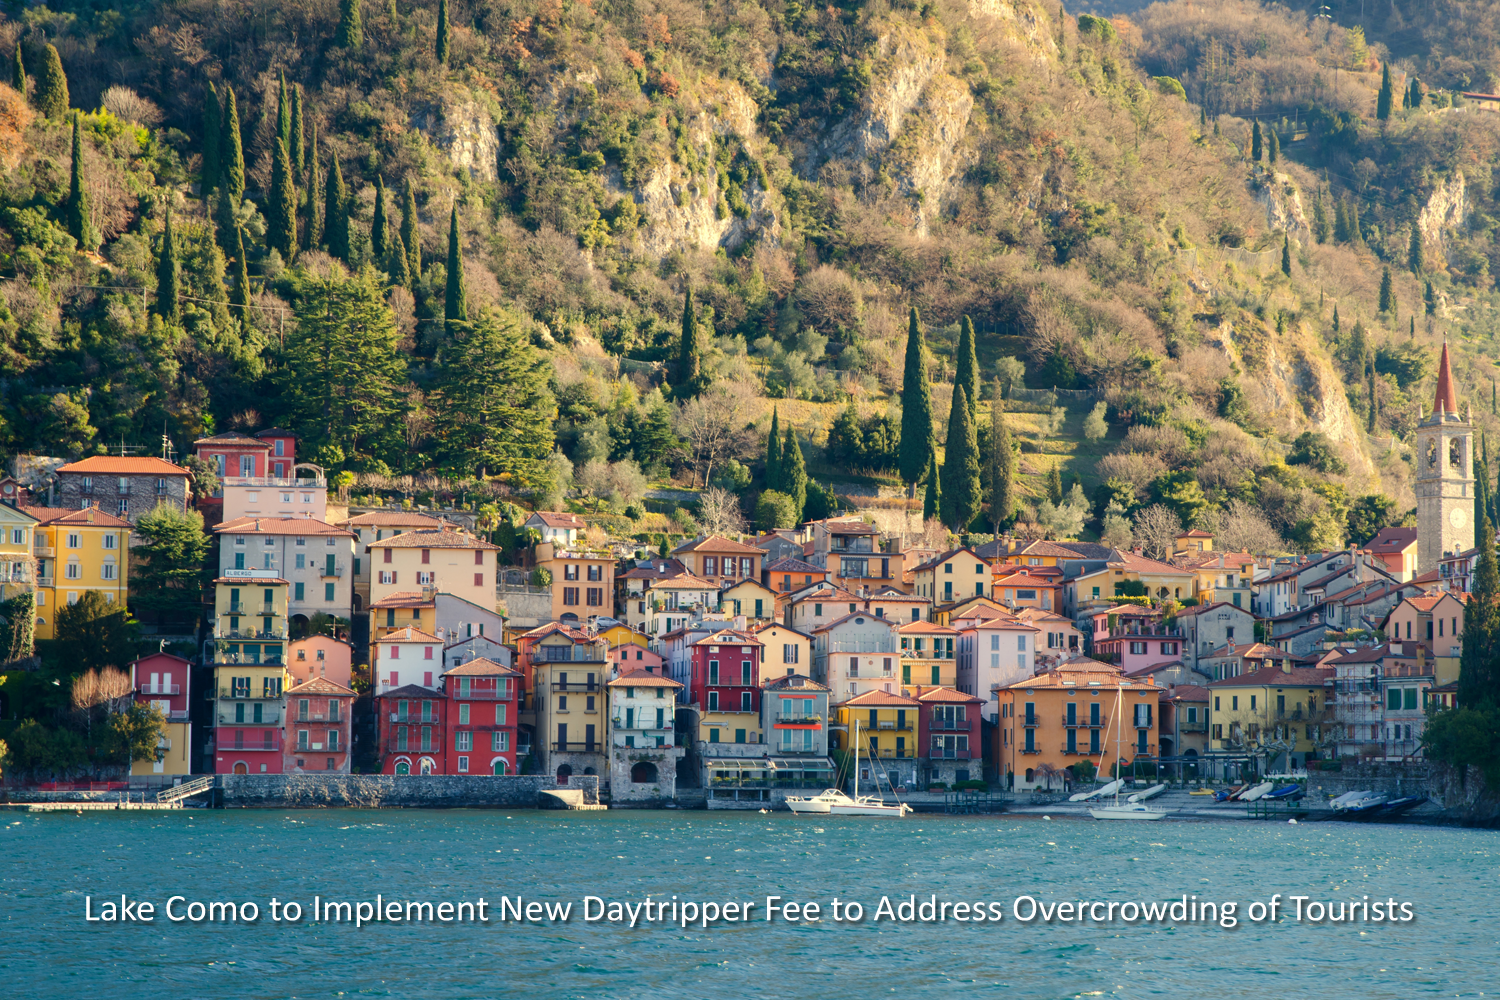 Lake Como to Implement New Daytripper Fee to Address Overcrowding of Tourists.